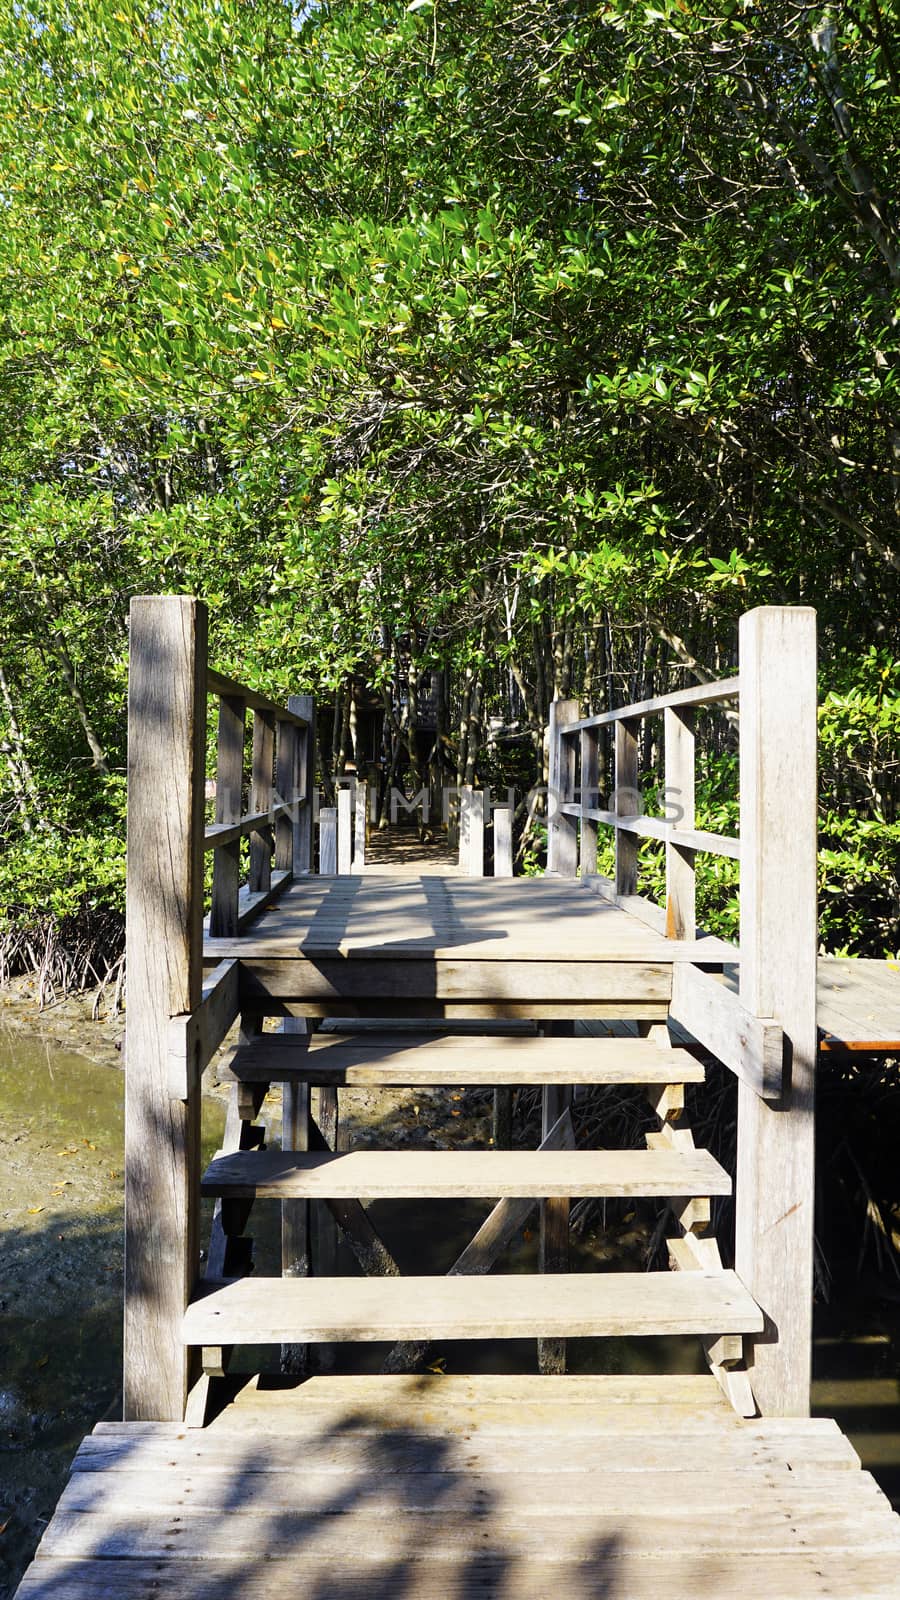 forest mangrove and the bridge walkway vertical by polarbearstudio